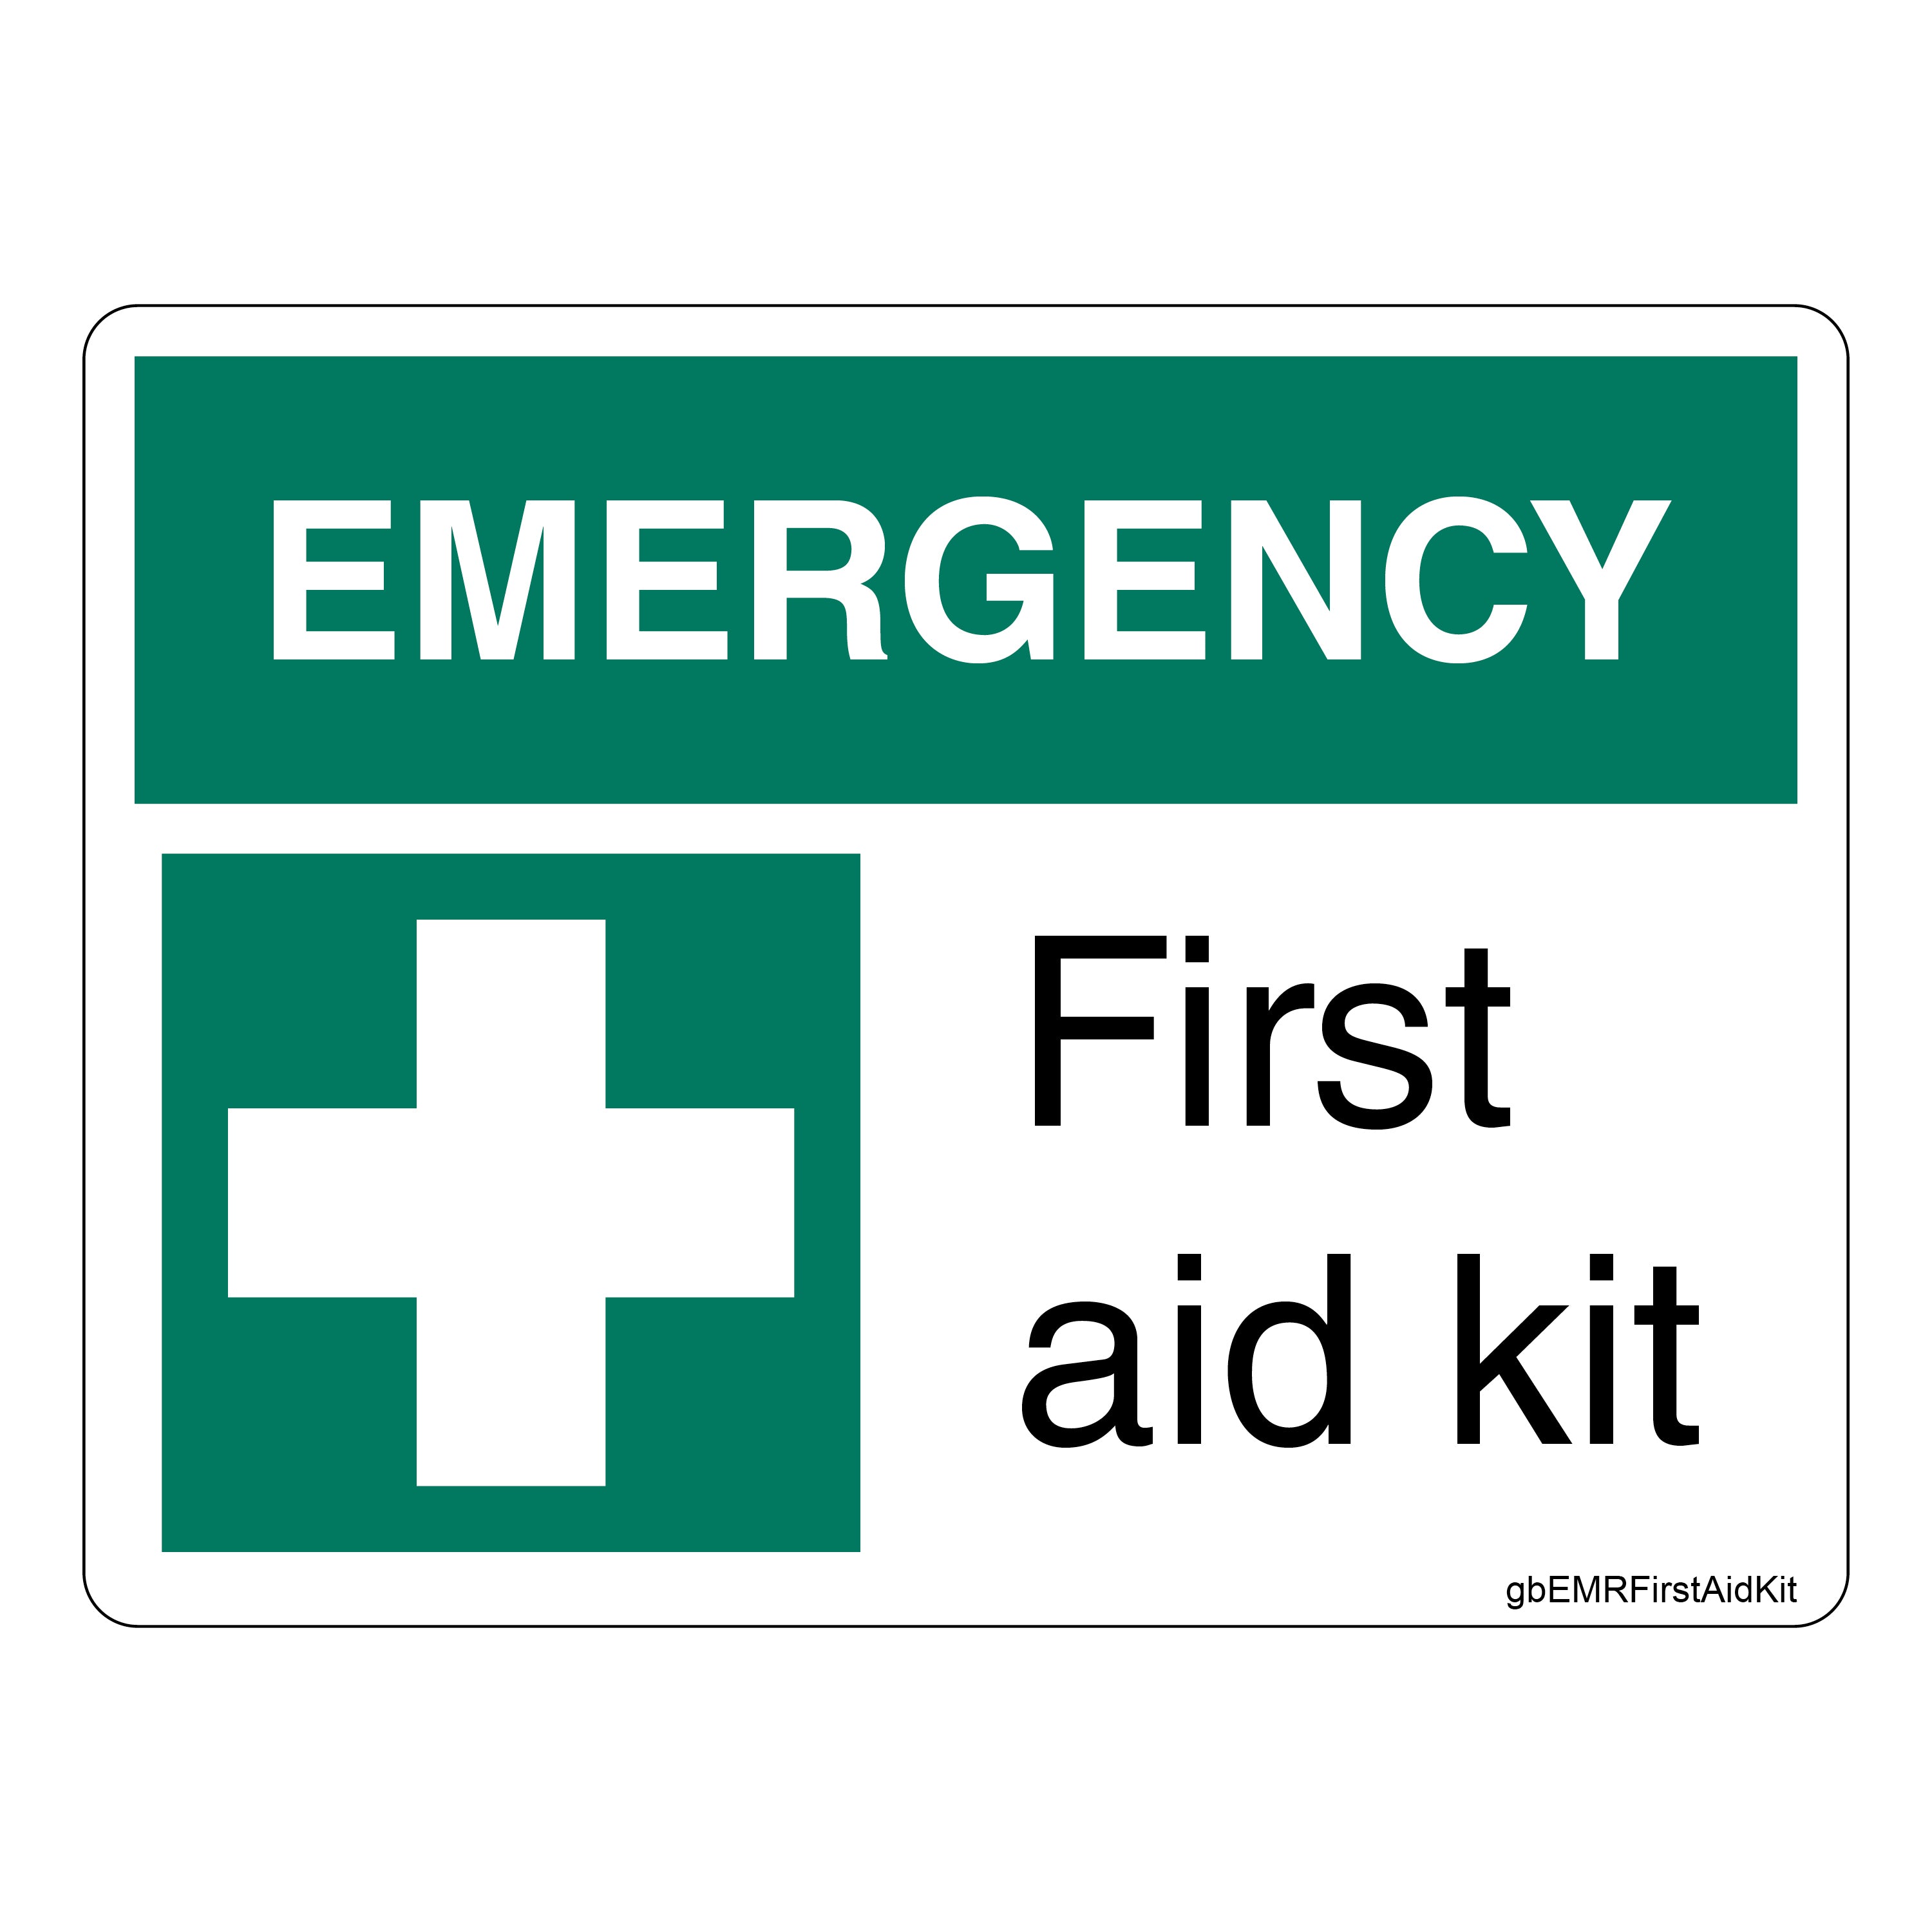 first aid kit sign